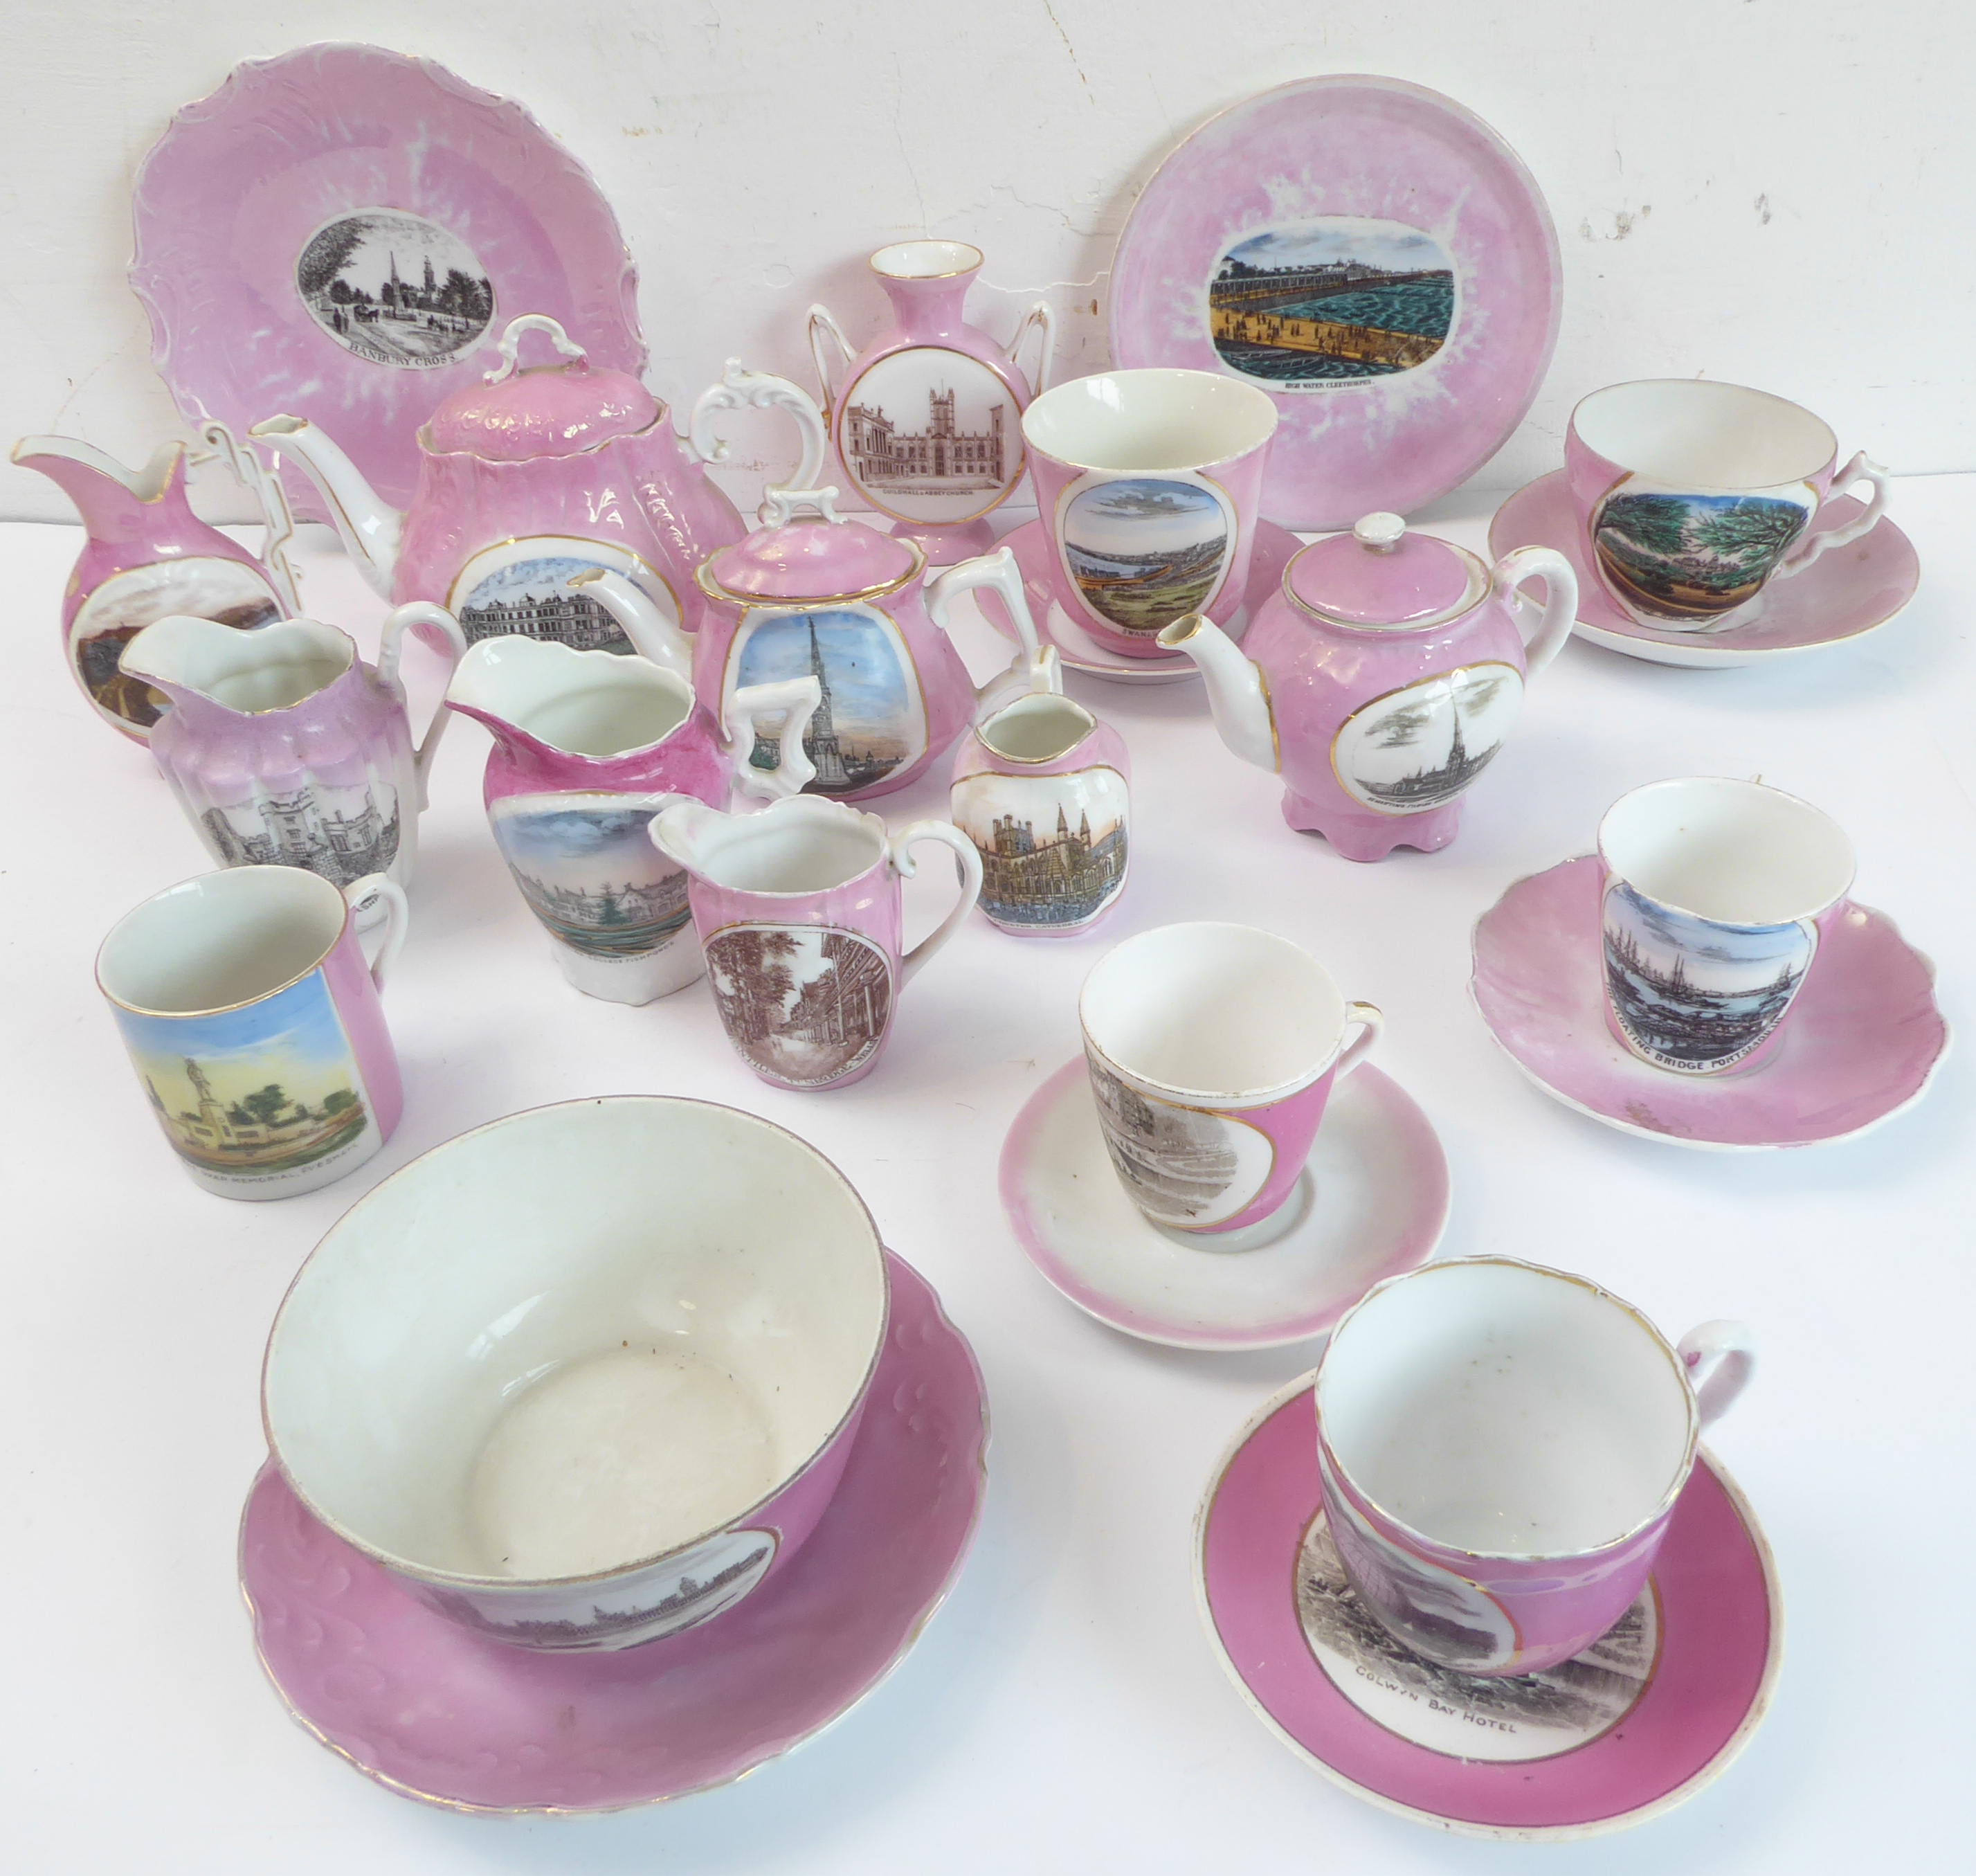 A selection of mostly late 19th century pink-glazed German porcelain commemorative ware to include